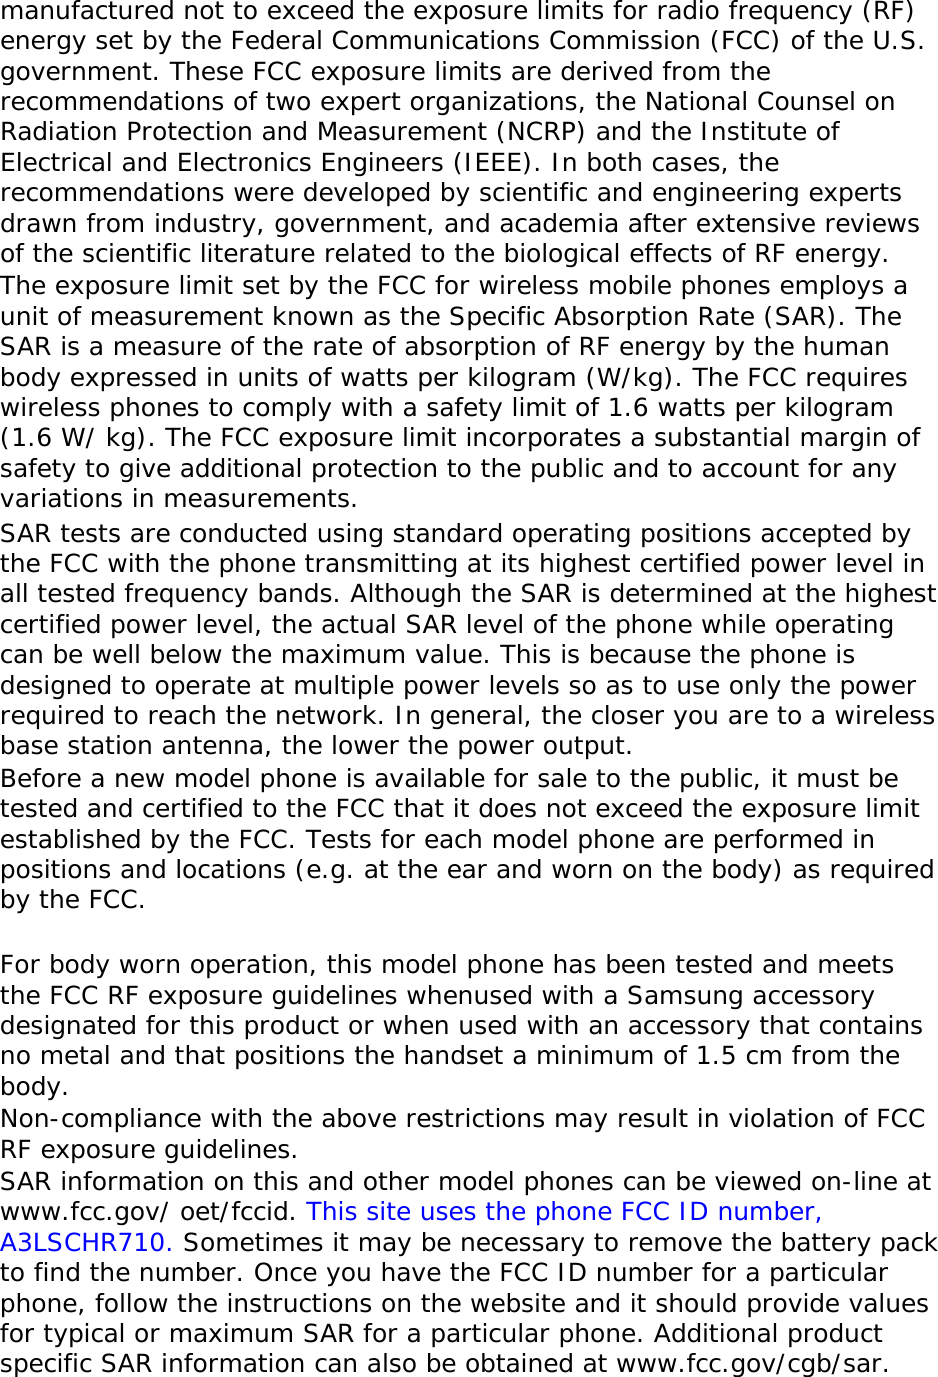 manufactured not to exceed the exposure limits for radio frequency (RF) energy set by the Federal Communications Commission (FCC) of the U.S. government. These FCC exposure limits are derived from the recommendations of two expert organizations, the National Counsel on Radiation Protection and Measurement (NCRP) and the Institute of Electrical and Electronics Engineers (IEEE). In both cases, the recommendations were developed by scientific and engineering experts drawn from industry, government, and academia after extensive reviews of the scientific literature related to the biological effects of RF energy. The exposure limit set by the FCC for wireless mobile phones employs a unit of measurement known as the Specific Absorption Rate (SAR). The SAR is a measure of the rate of absorption of RF energy by the human body expressed in units of watts per kilogram (W/kg). The FCC requires wireless phones to comply with a safety limit of 1.6 watts per kilogram (1.6 W/ kg). The FCC exposure limit incorporates a substantial margin of safety to give additional protection to the public and to account for any variations in measurements. SAR tests are conducted using standard operating positions accepted by the FCC with the phone transmitting at its highest certified power level in all tested frequency bands. Although the SAR is determined at the highest certified power level, the actual SAR level of the phone while operating can be well below the maximum value. This is because the phone is designed to operate at multiple power levels so as to use only the power required to reach the network. In general, the closer you are to a wireless base station antenna, the lower the power output. Before a new model phone is available for sale to the public, it must be tested and certified to the FCC that it does not exceed the exposure limit established by the FCC. Tests for each model phone are performed in positions and locations (e.g. at the ear and worn on the body) as required by the FCC.    For body worn operation, this model phone has been tested and meets the FCC RF exposure guidelines whenused with a Samsung accessory designated for this product or when used with an accessory that contains no metal and that positions the handset a minimum of 1.5 cm from the body.  Non-compliance with the above restrictions may result in violation of FCC RF exposure guidelines. SAR information on this and other model phones can be viewed on-line at www.fcc.gov/ oet/fccid. This site uses the phone FCC ID number, A3LSCHR710. Sometimes it may be necessary to remove the battery pack to find the number. Once you have the FCC ID number for a particular phone, follow the instructions on the website and it should provide values for typical or maximum SAR for a particular phone. Additional product specific SAR information can also be obtained at www.fcc.gov/cgb/sar. 